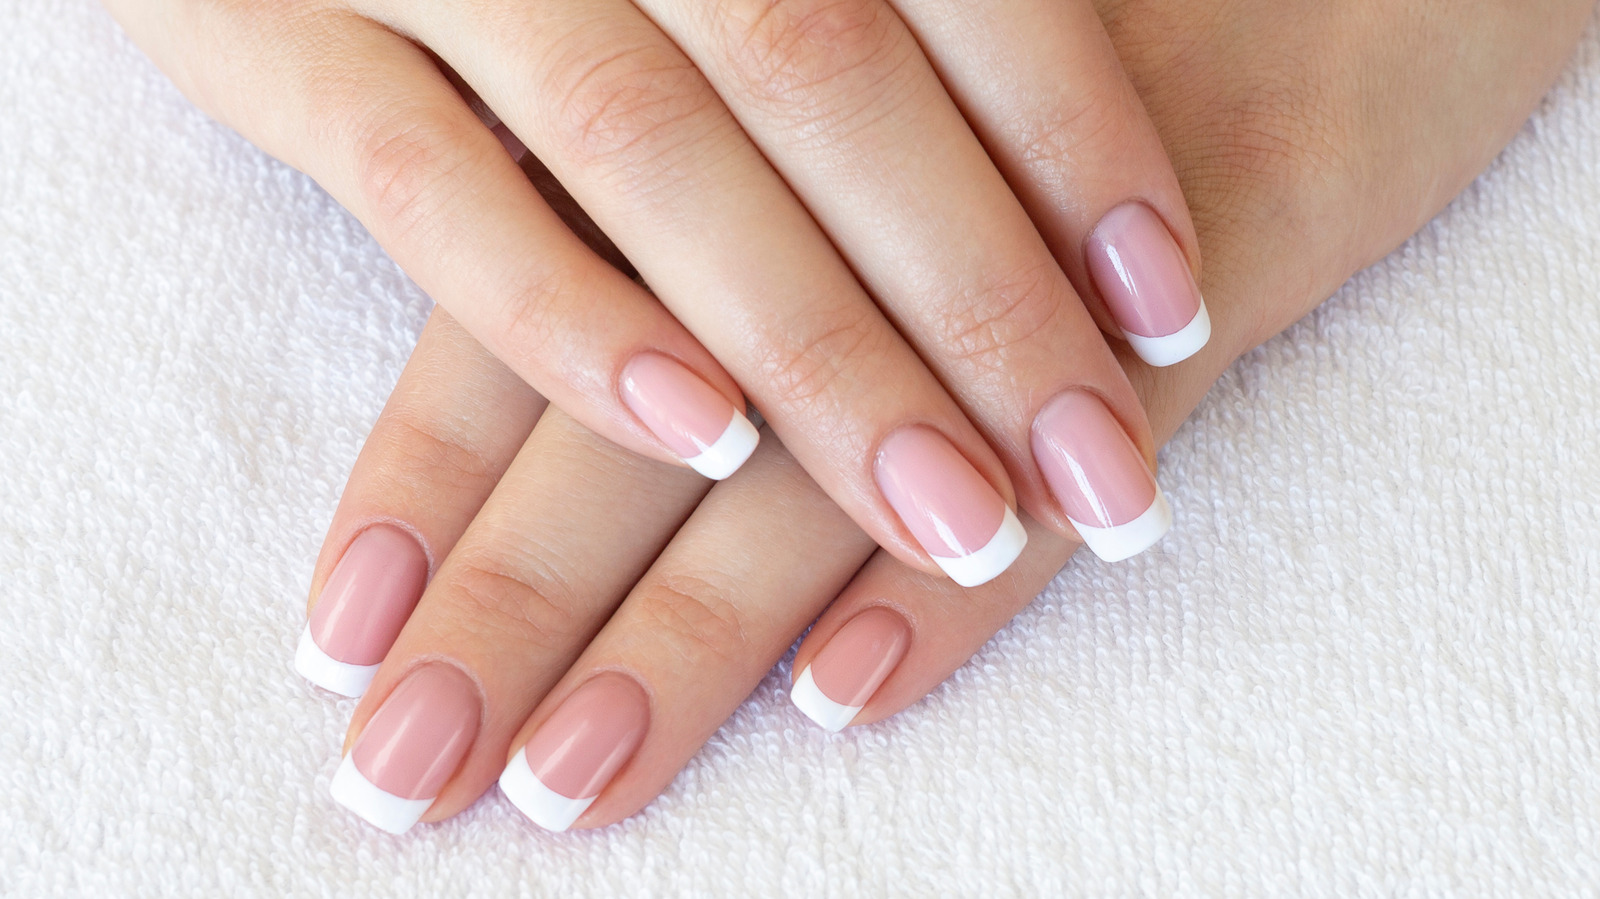 7. "French manicure for a classic look" - wide 8